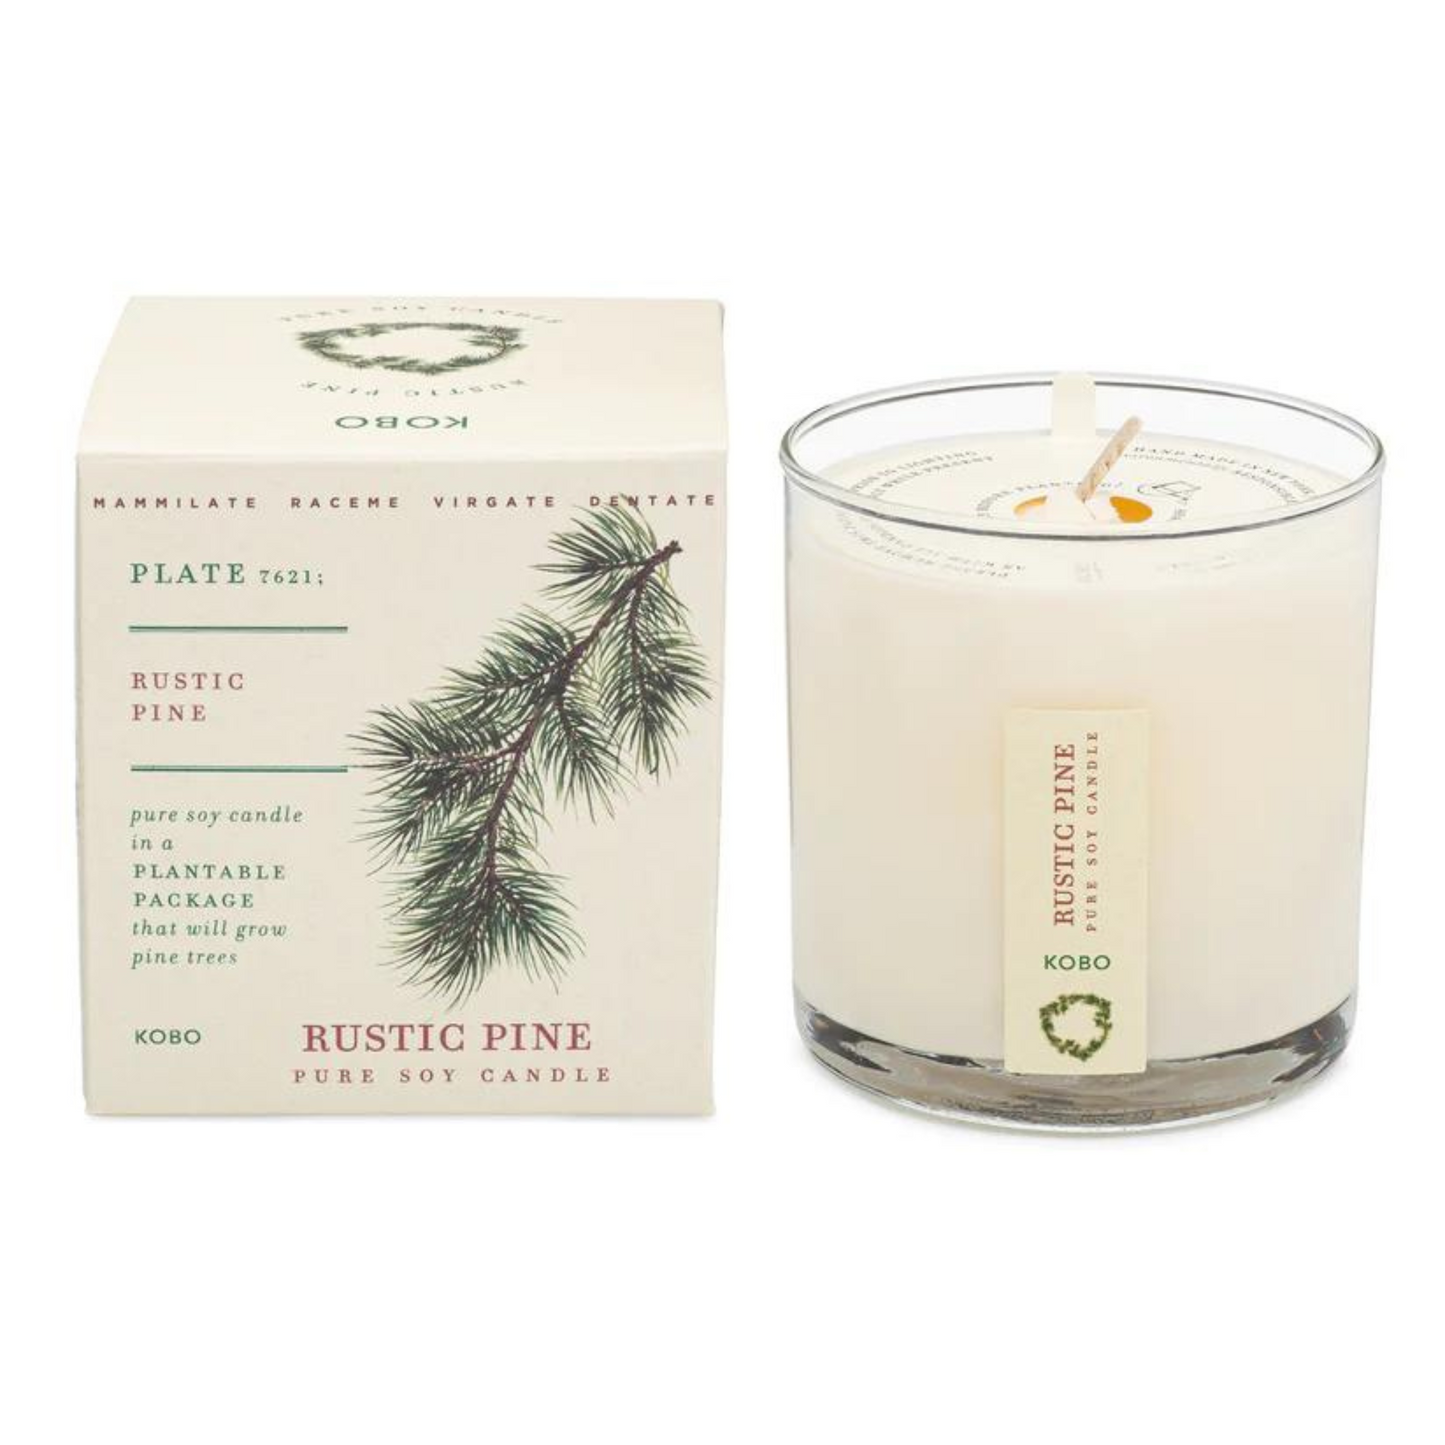 Primary Image of Rustic Pine Plant The box Candle